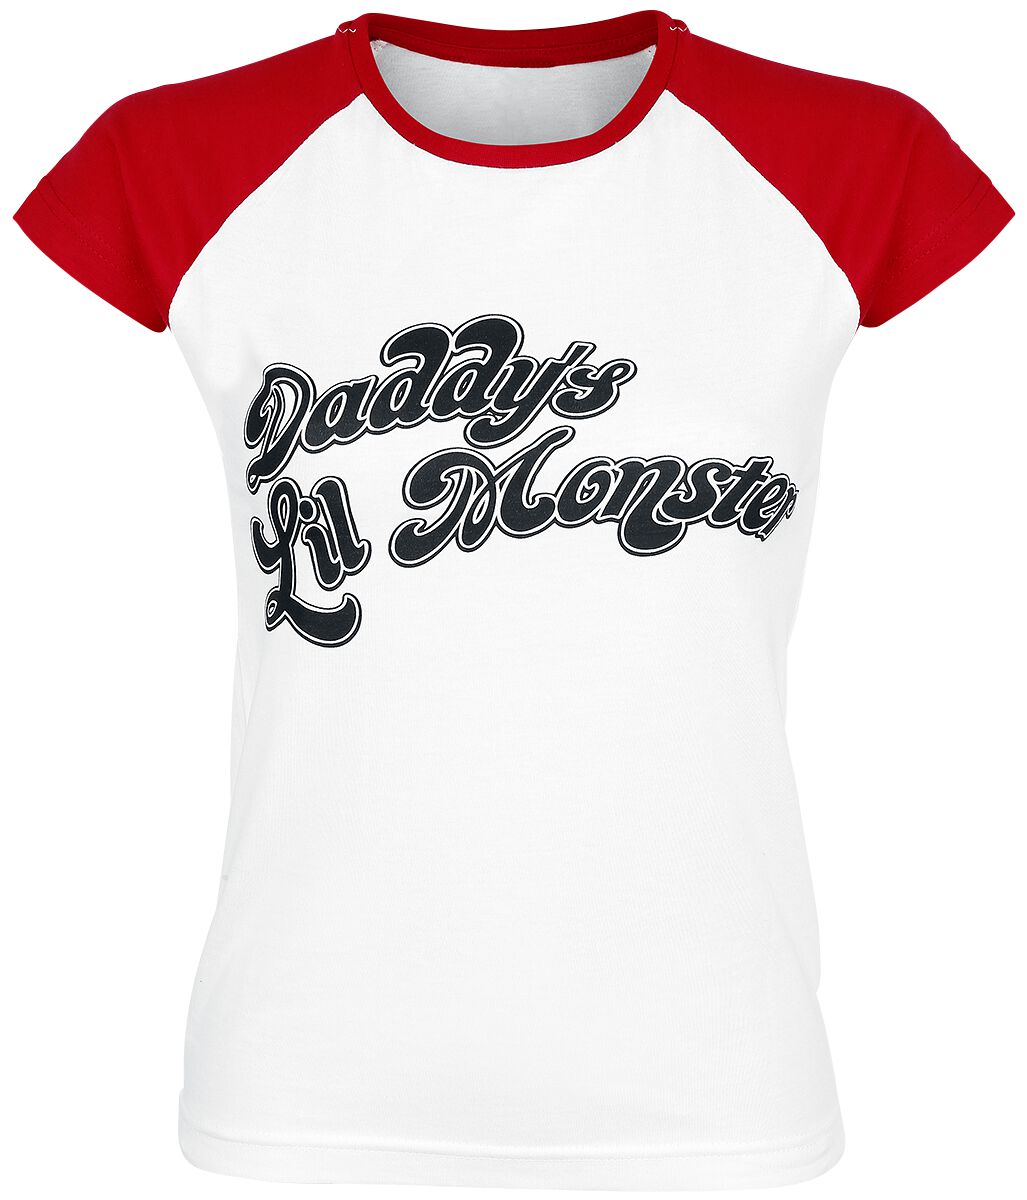 Suicide Squad Daddy's Lil' Monster T-Shirt weiß rot in XL von Suicide Squad